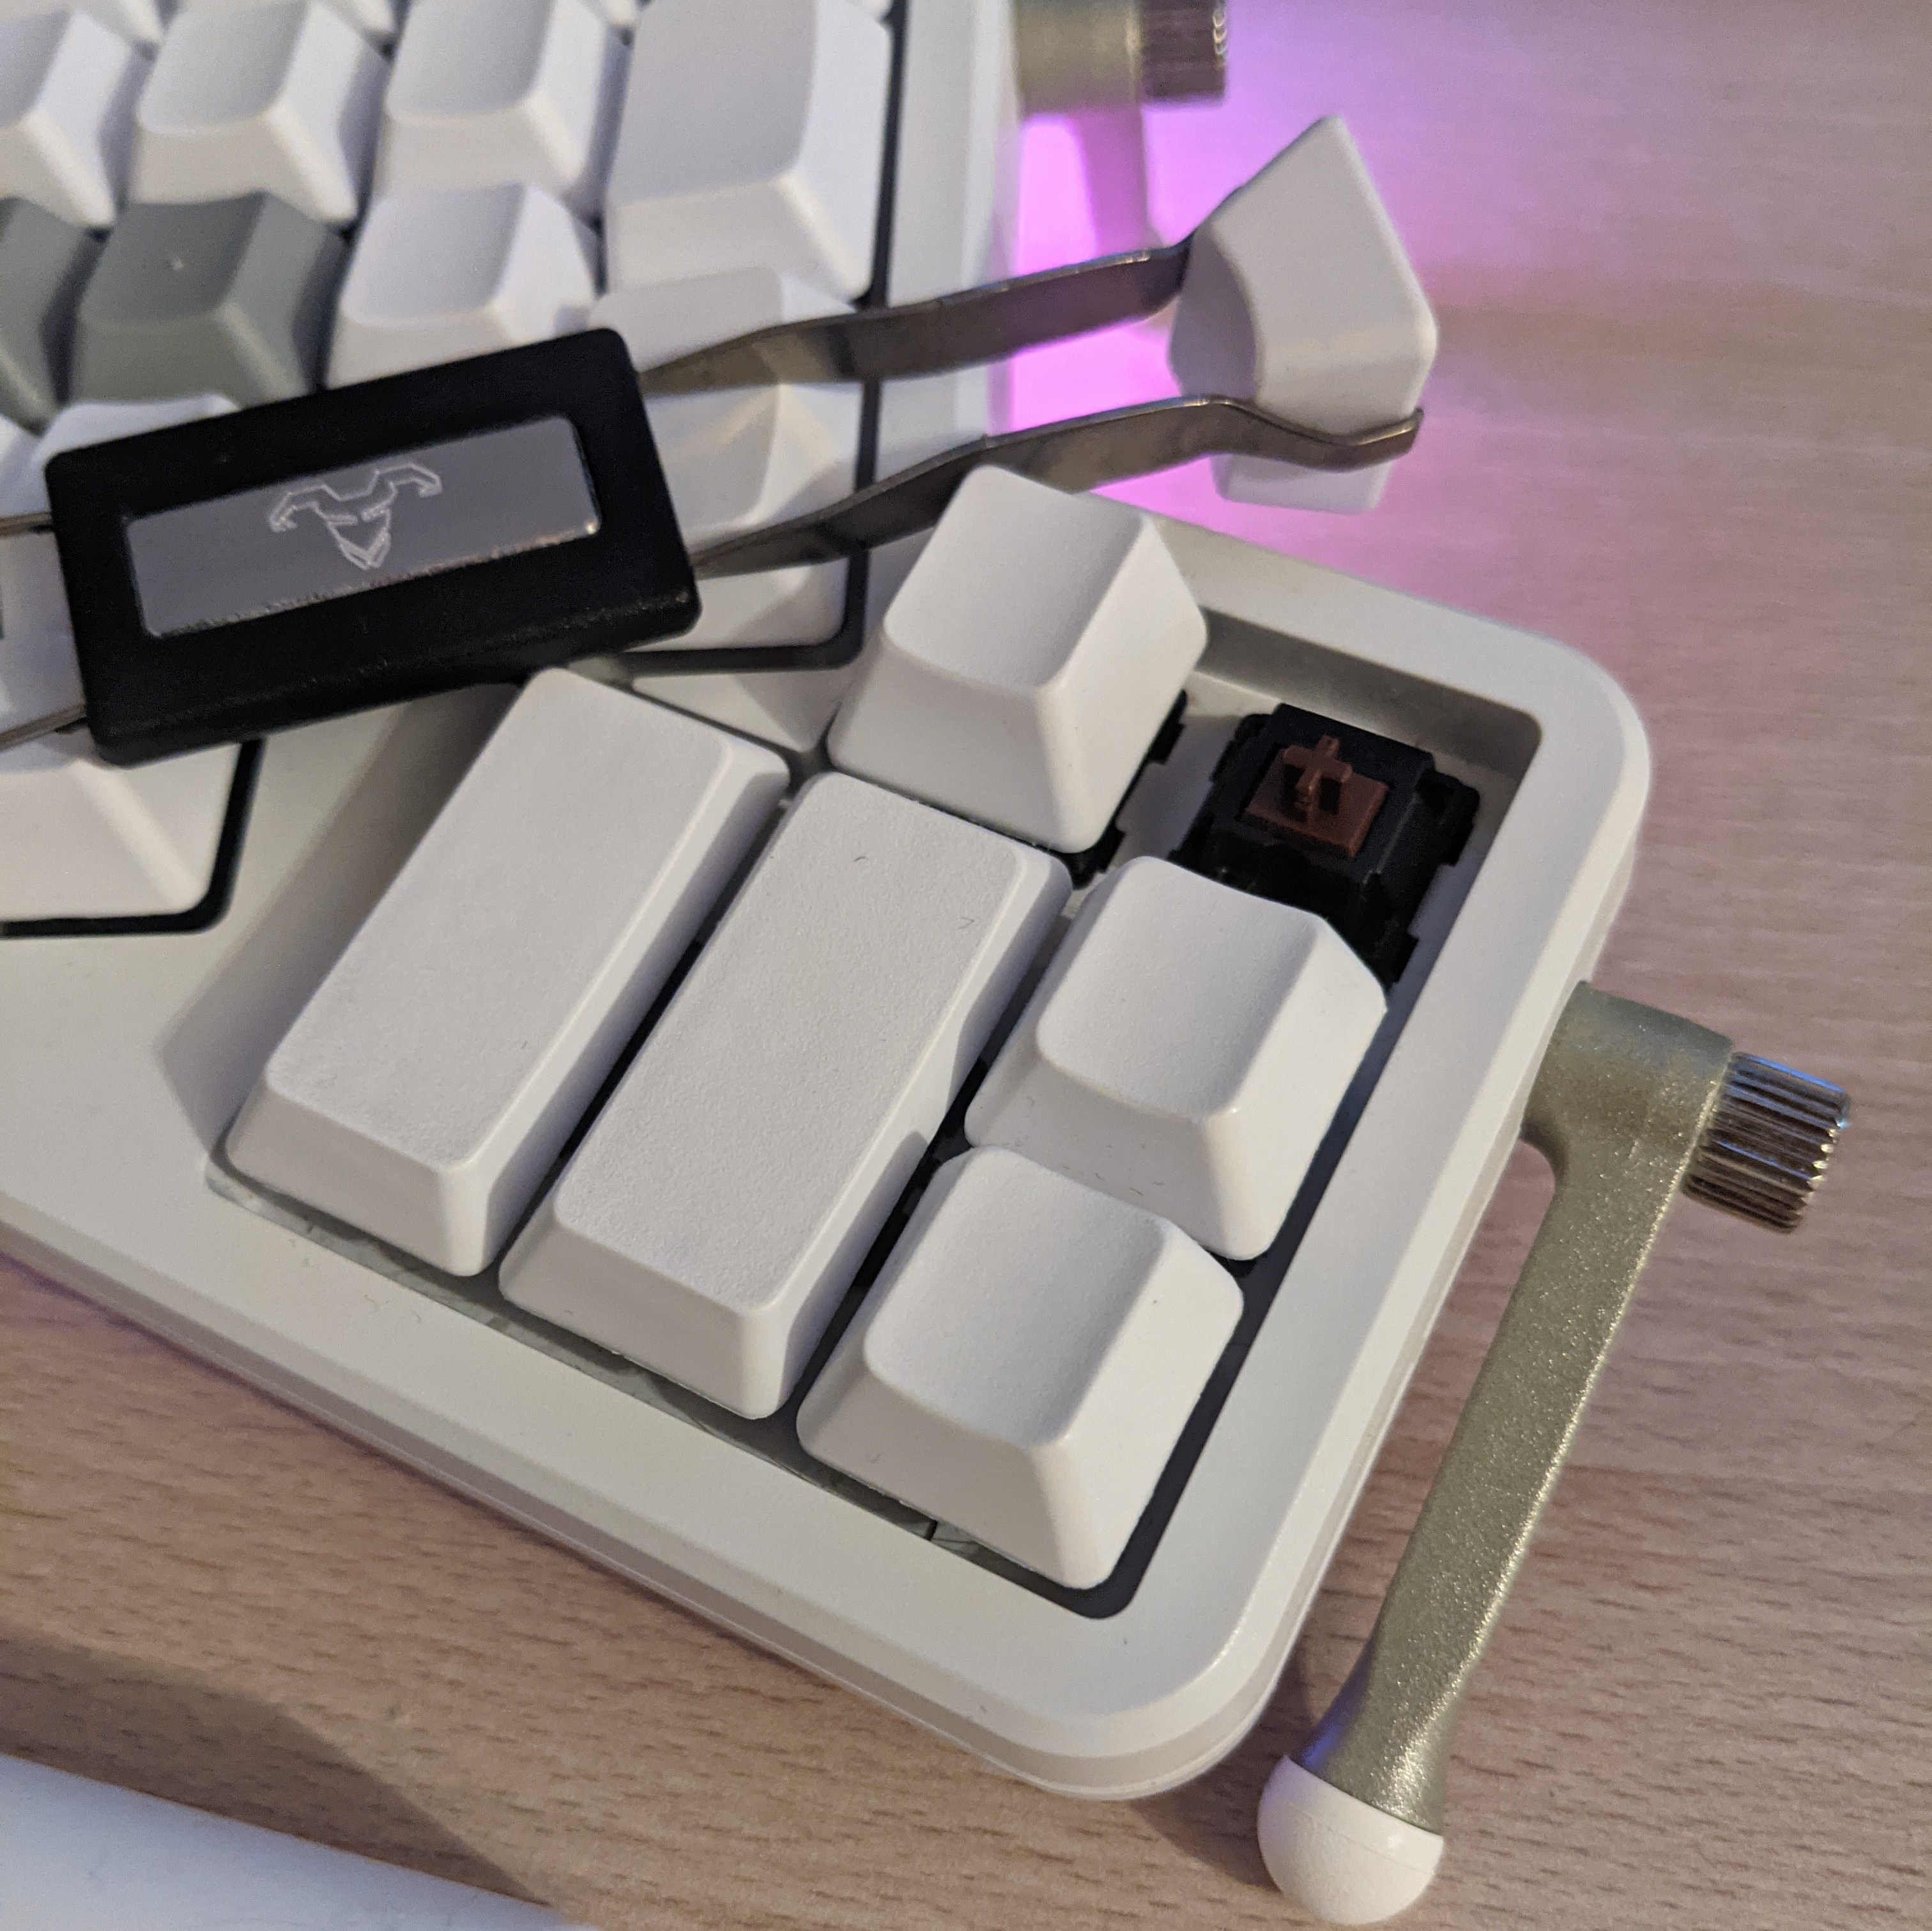 A pulled keycap and the MX Brown switch